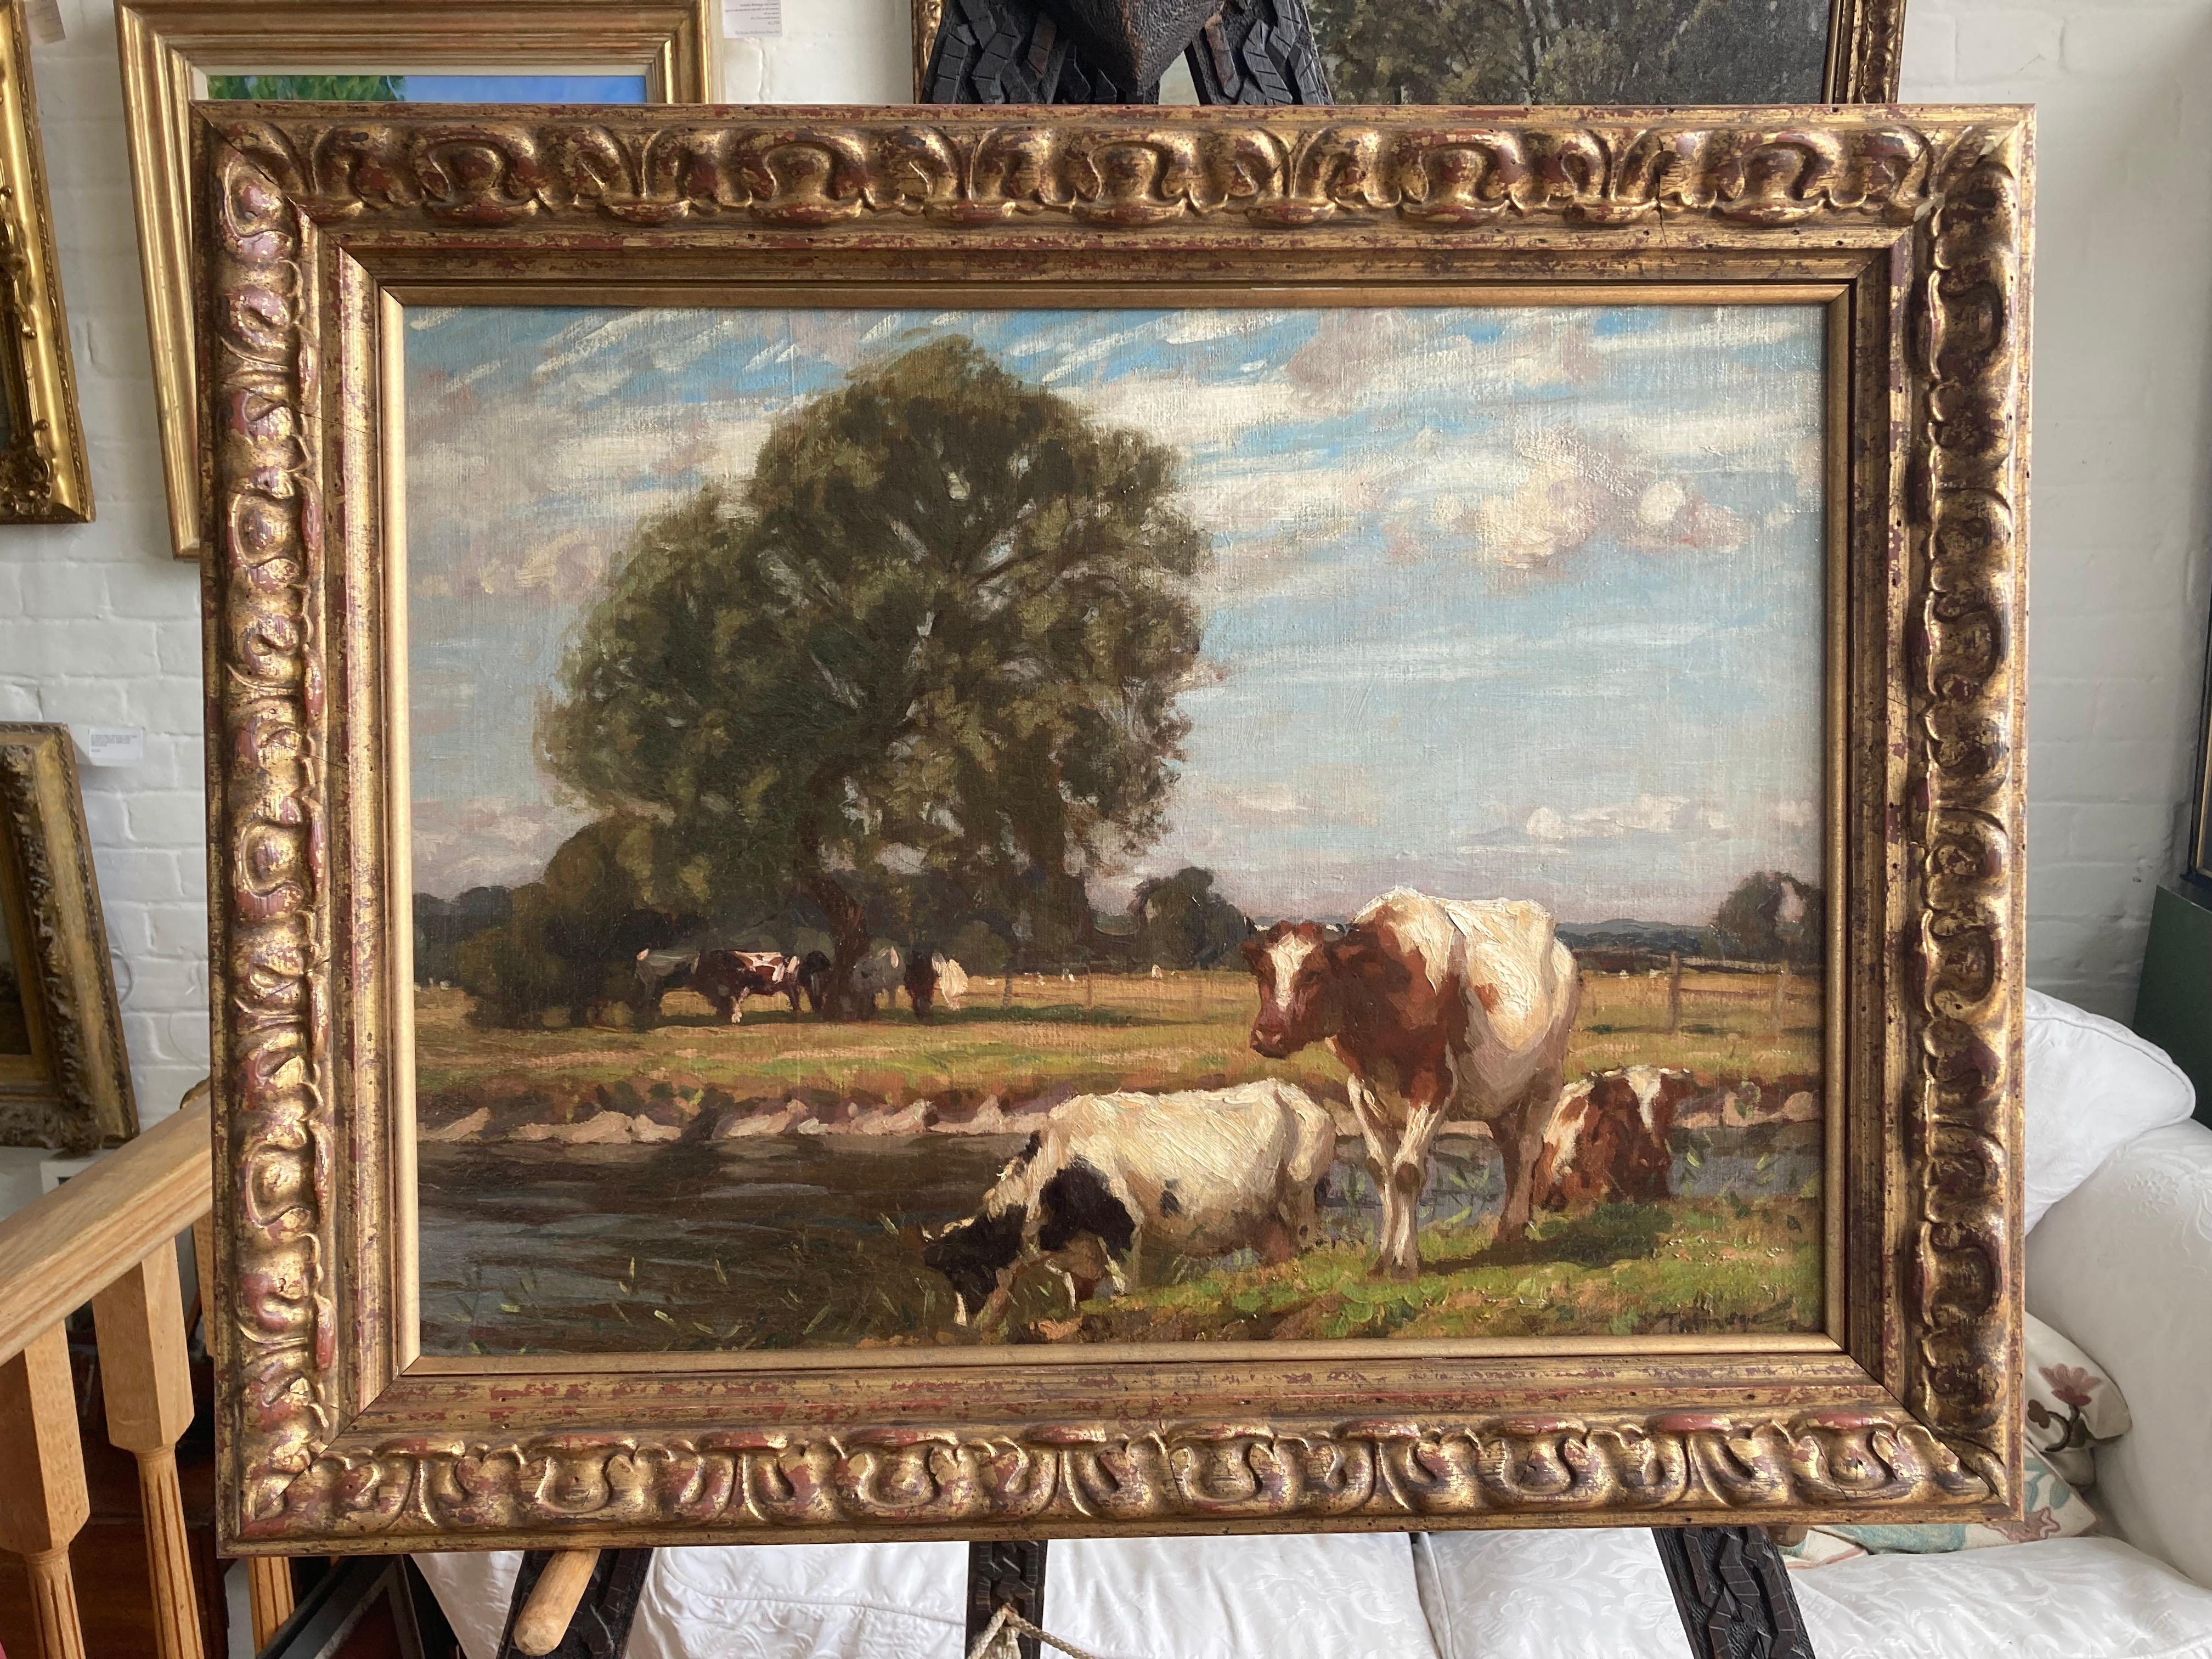 An idyllic scene on an impressive scale of cattle grazing in Constable country.

Algernon Mayow Talmage (1871-1939)
​Cattle grazing on the banks of the river Stour
Signed
Oil on canvas
18 x 24 inches
22½ x 28½ inches including the frame

Algernon